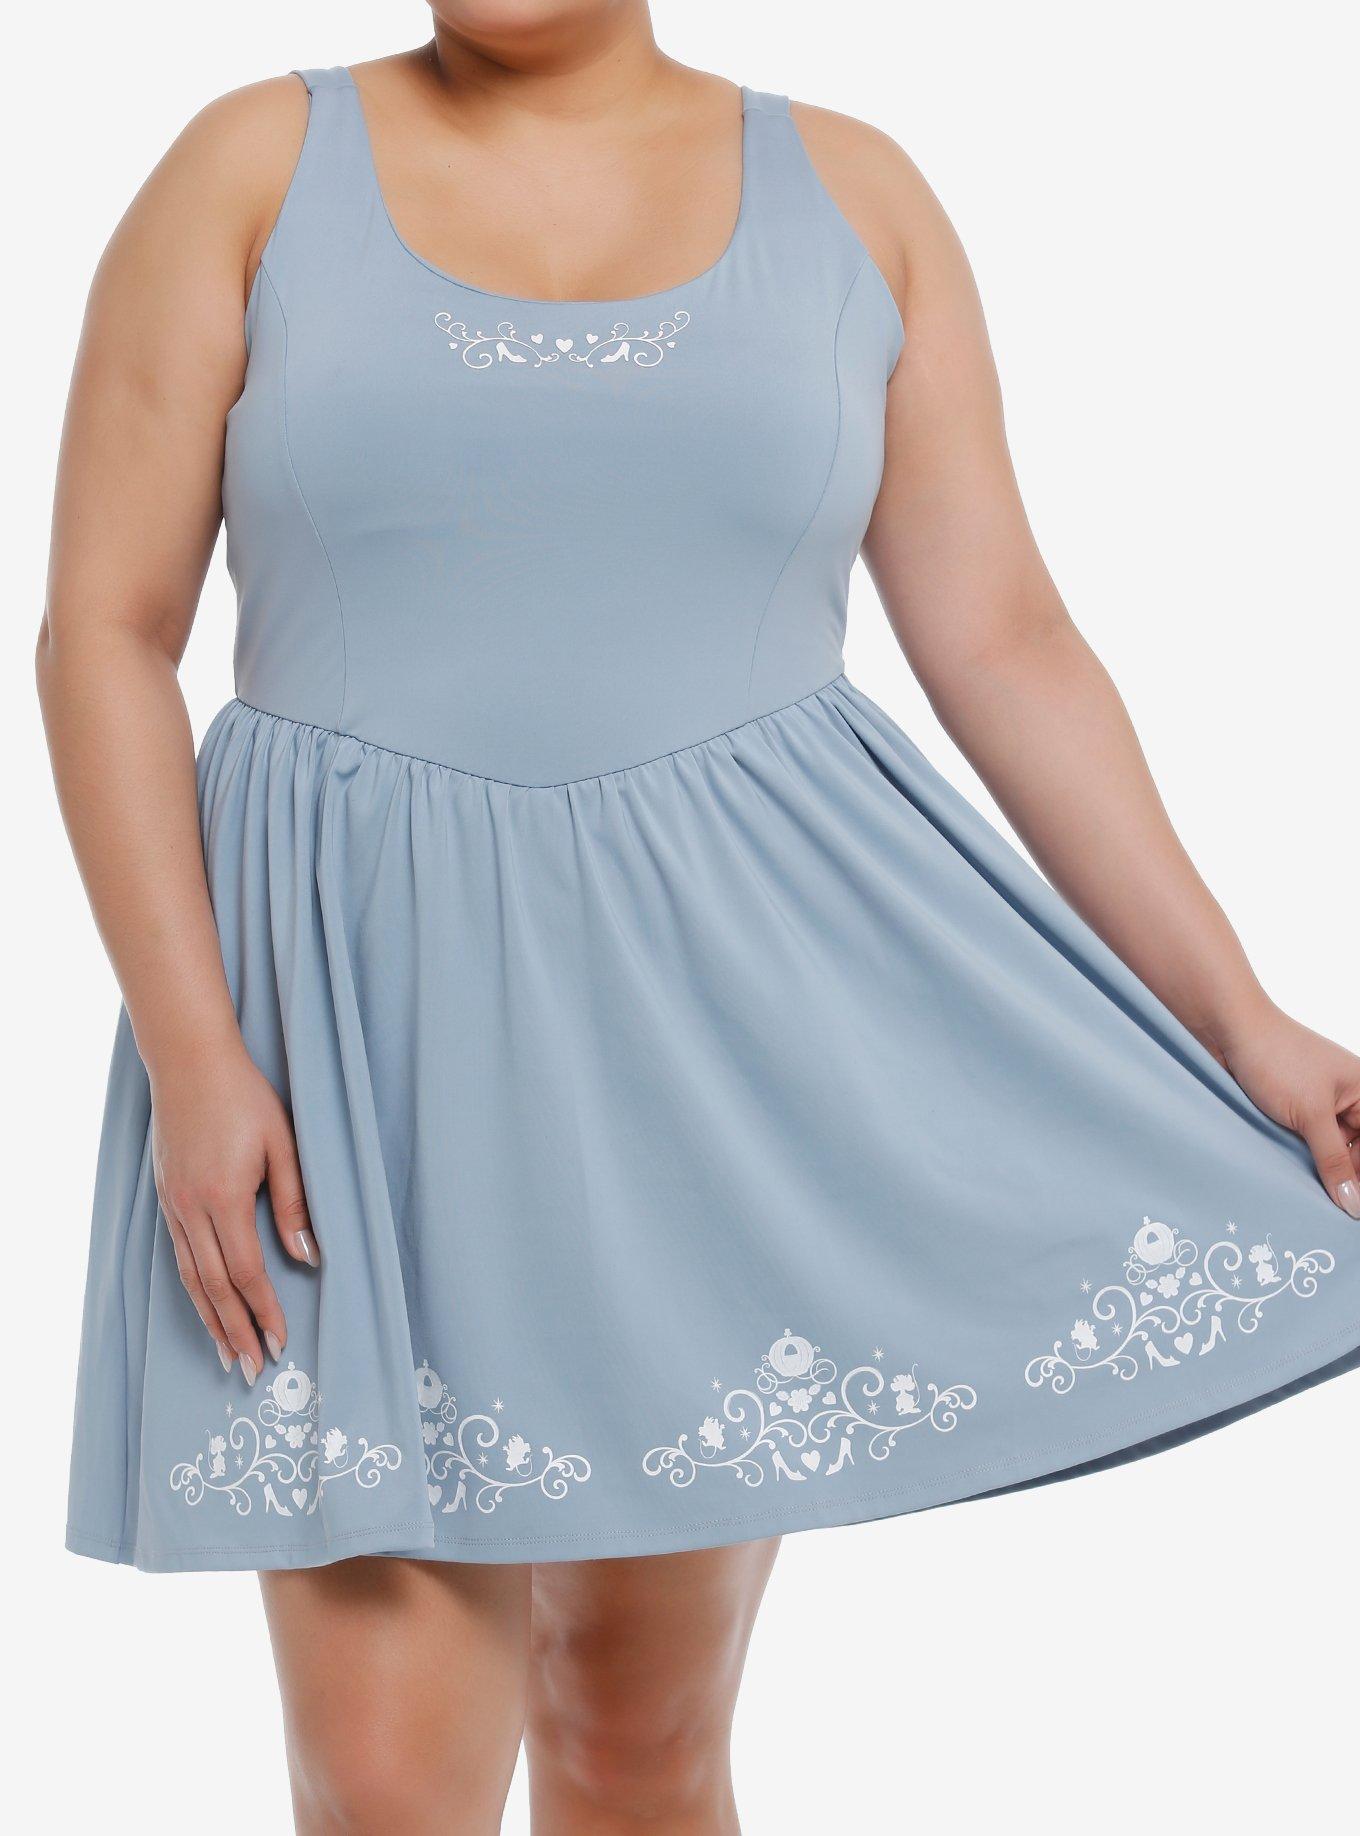 Plus Size Athletic Dresses // Where to Find Athletic Dresses in Plus Size 